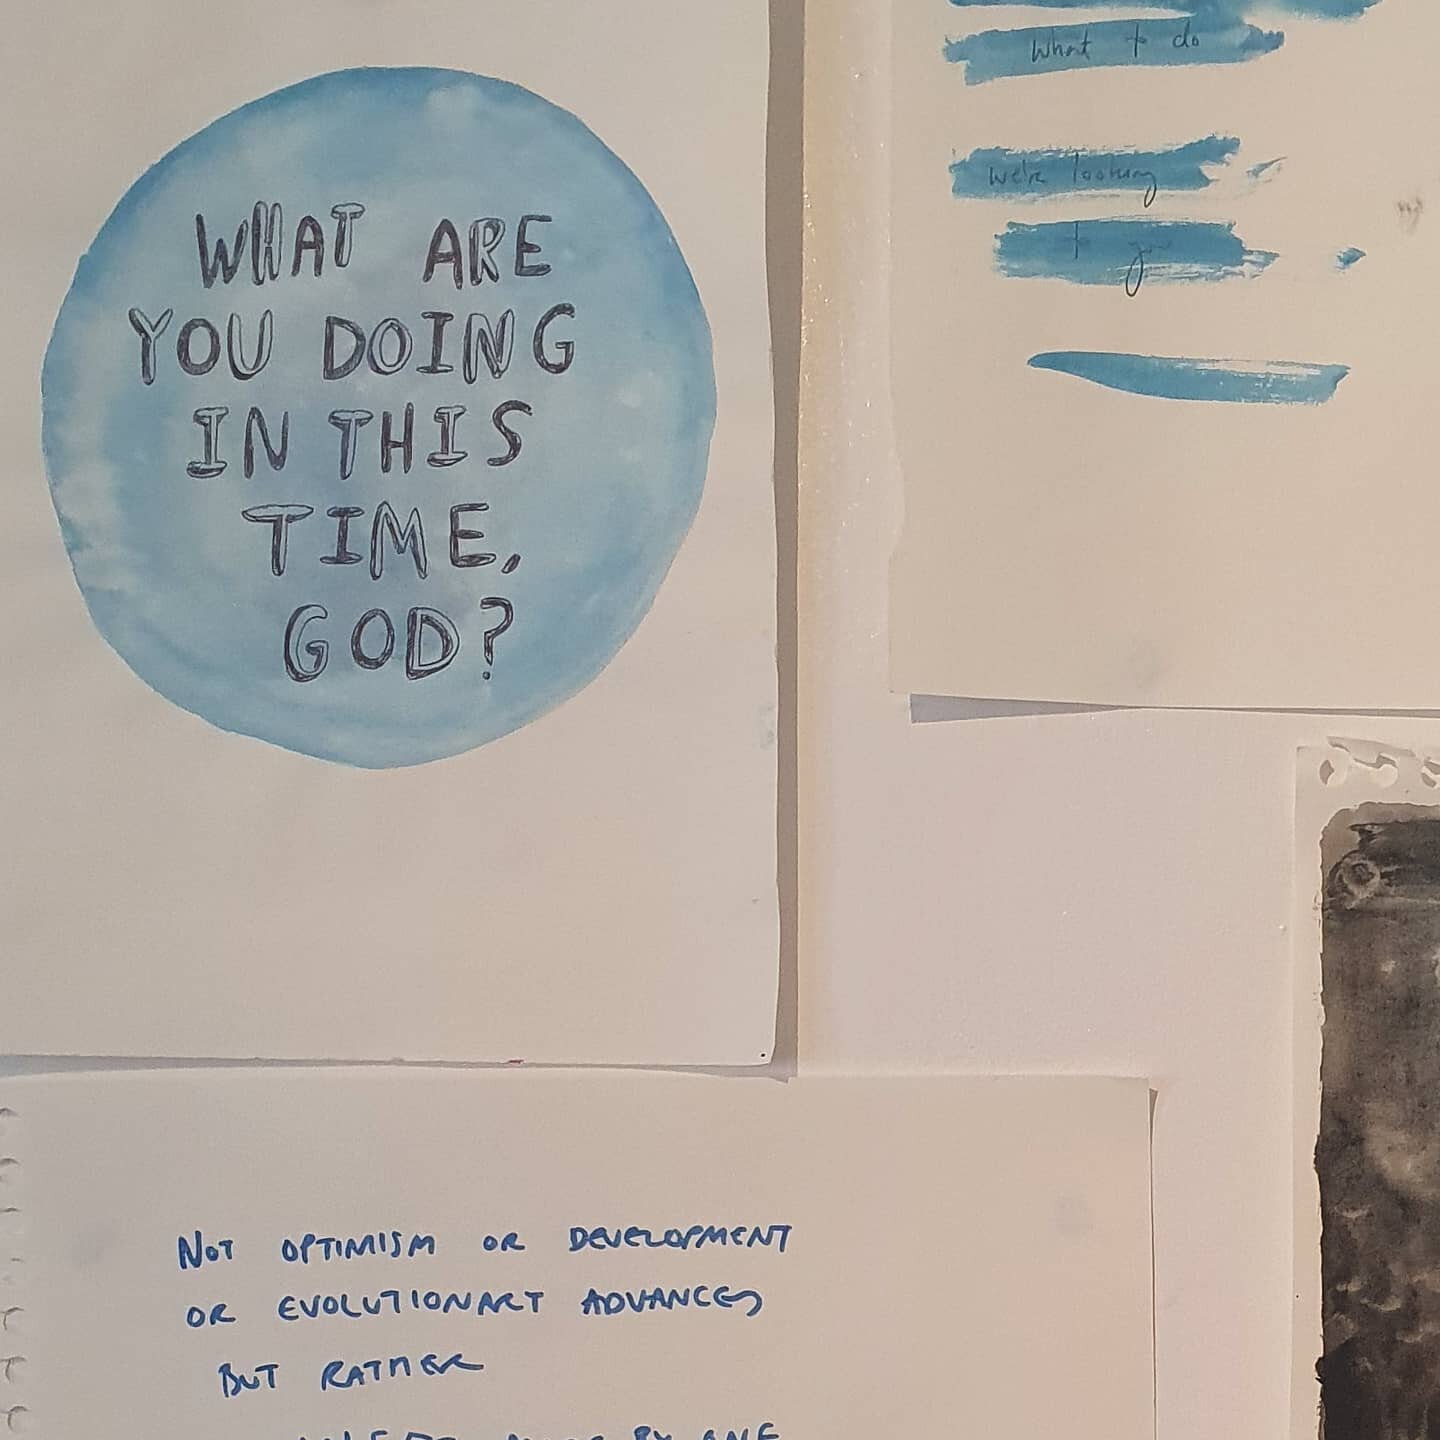 Year in Lockdown//
One year ago I wrote down these words and stuck them on the wall: &quot;What are you doing in this time, God?&quot;
At times its been an expression of pain, of anger - why are you letting this happen? How can there be any good in t